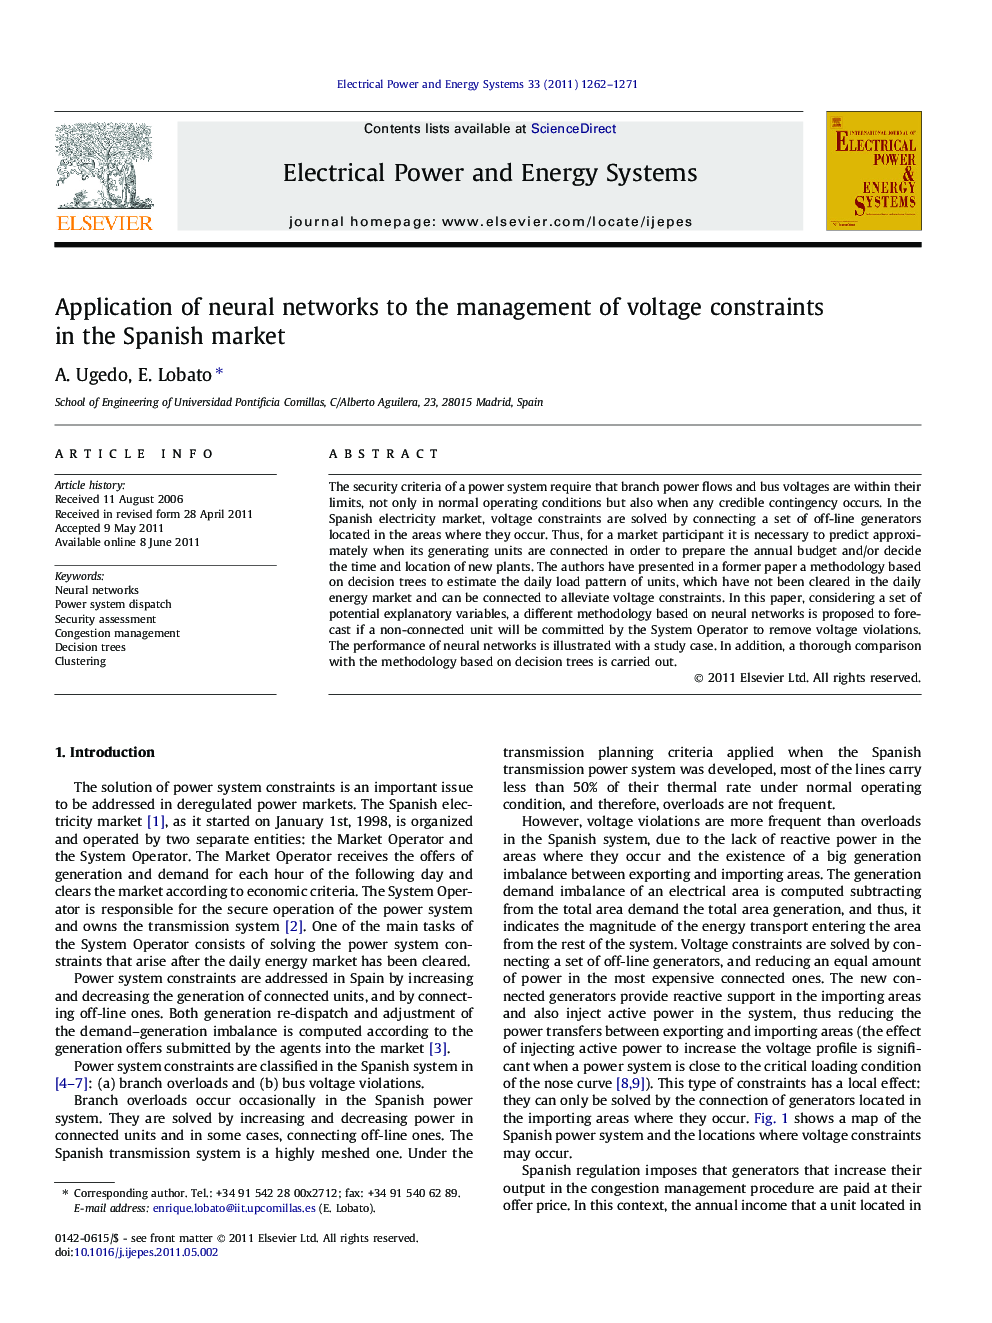 Application of neural networks to the management of voltage constraints in the Spanish market